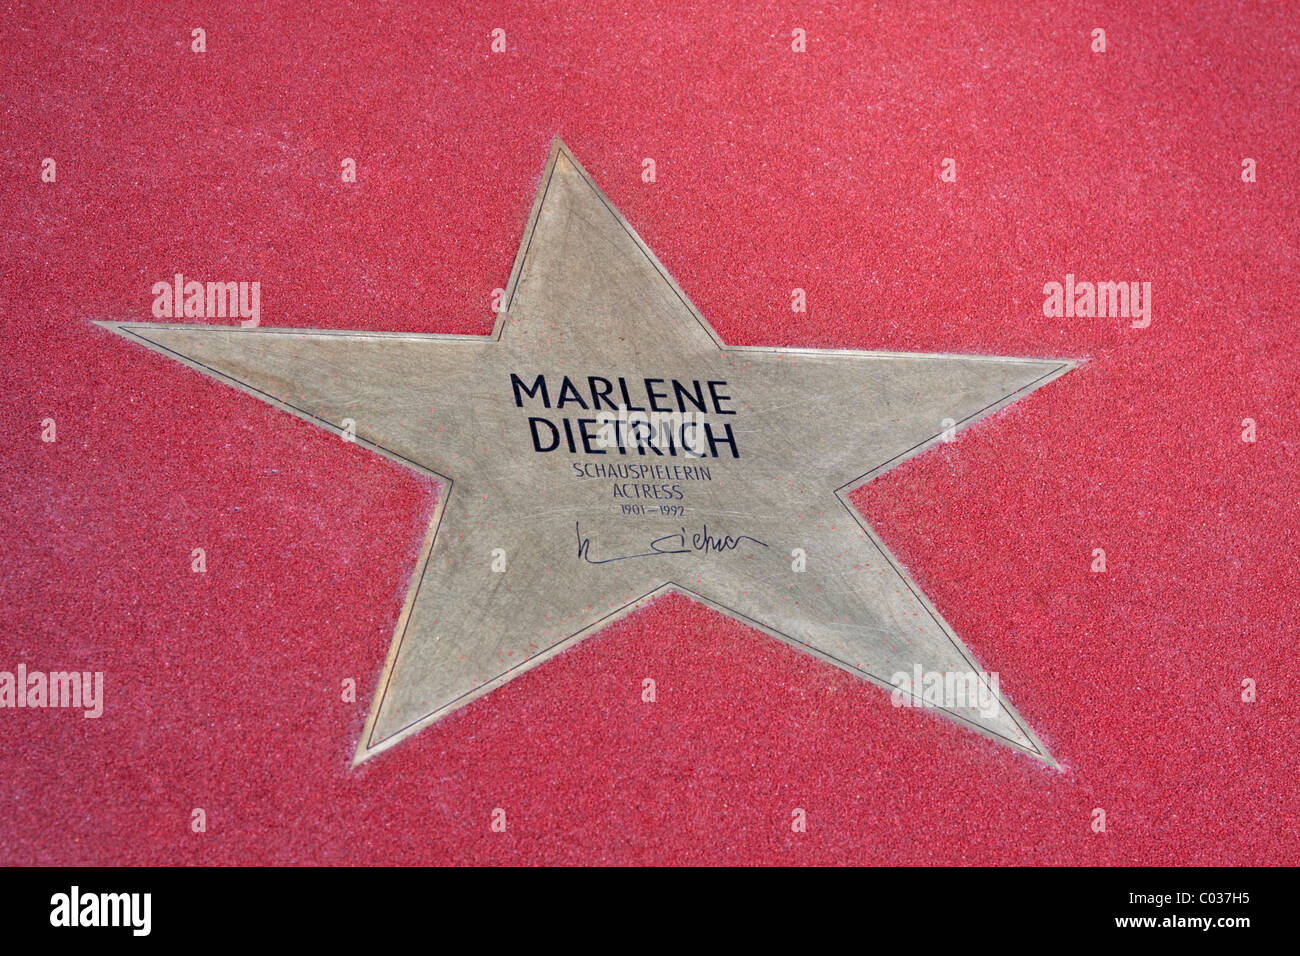 Star for Marlene Dietrich, actress, Boulevard of the Stars at Potsdamer Platz in Berlin, Germany, Europe Stock Photo